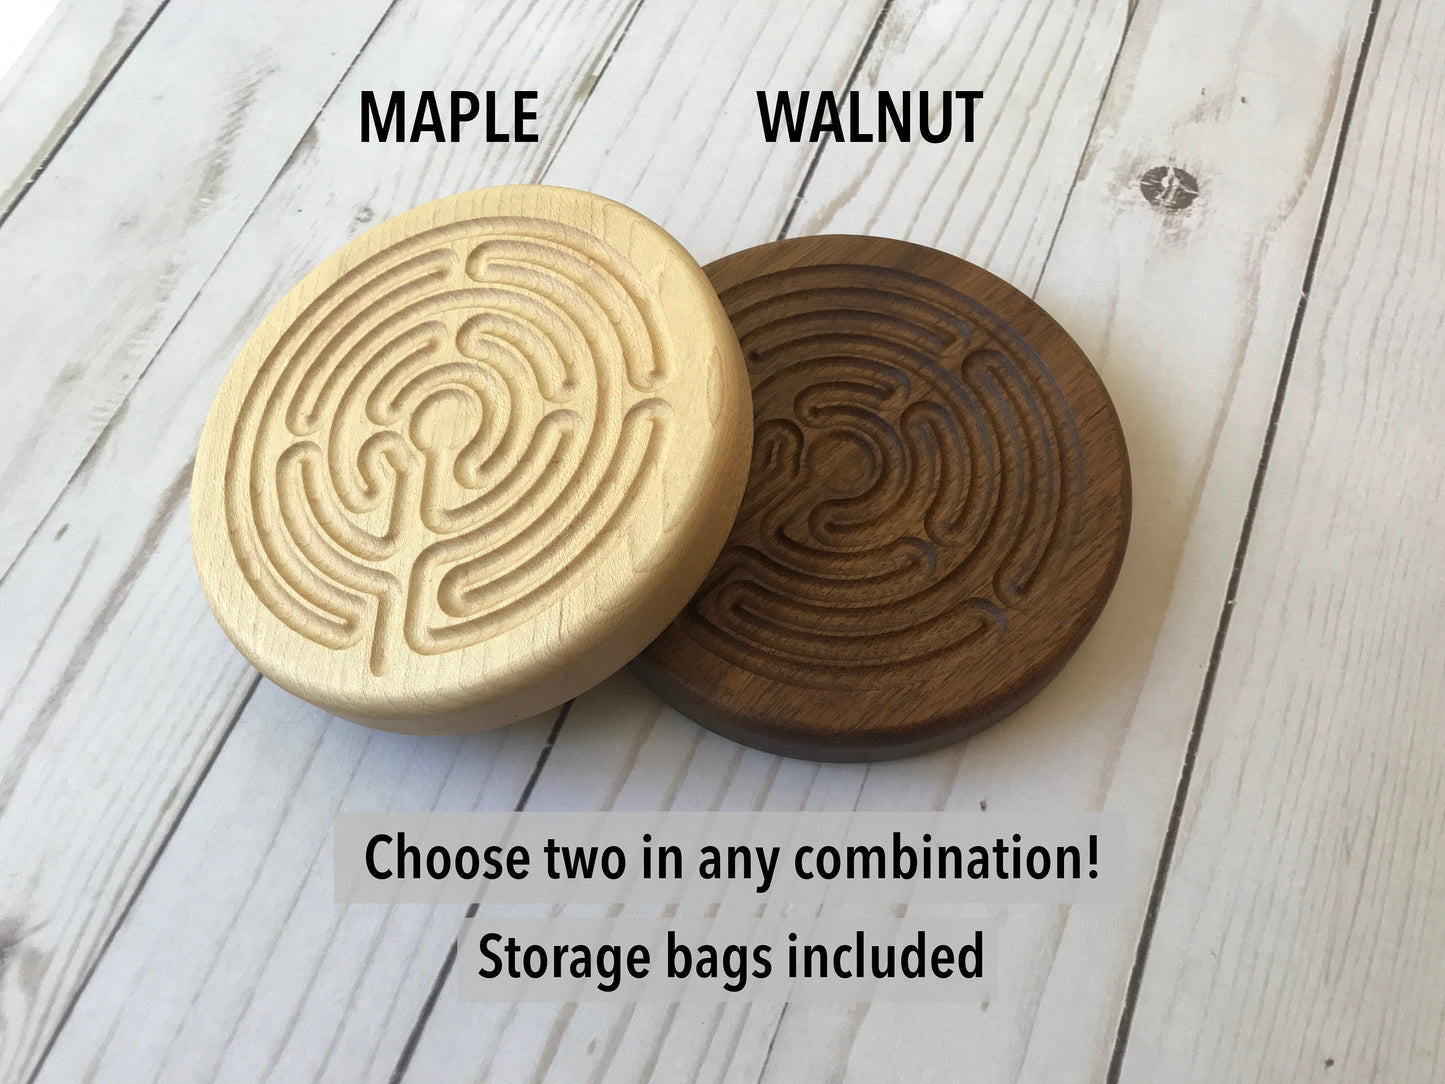 Bundle of Two Small Chartres-style Finger Labyrinth, Walnut and Maple Wood, 4.75" diameter